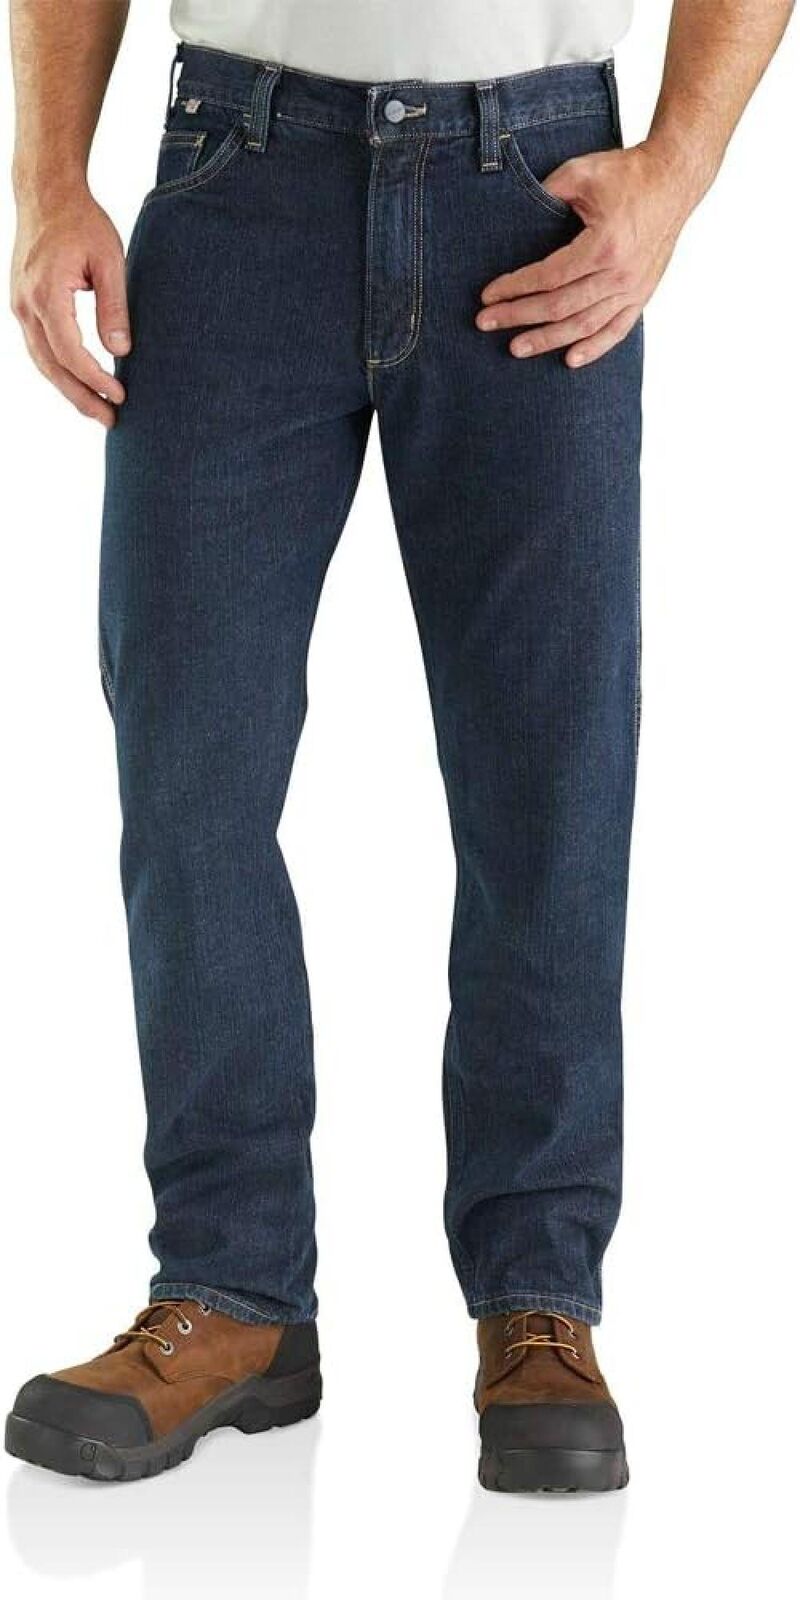 Carhartt Mens Flame-Resistant Rugged Flex Relaxed Jeans Indigo Wash Blue 32x32